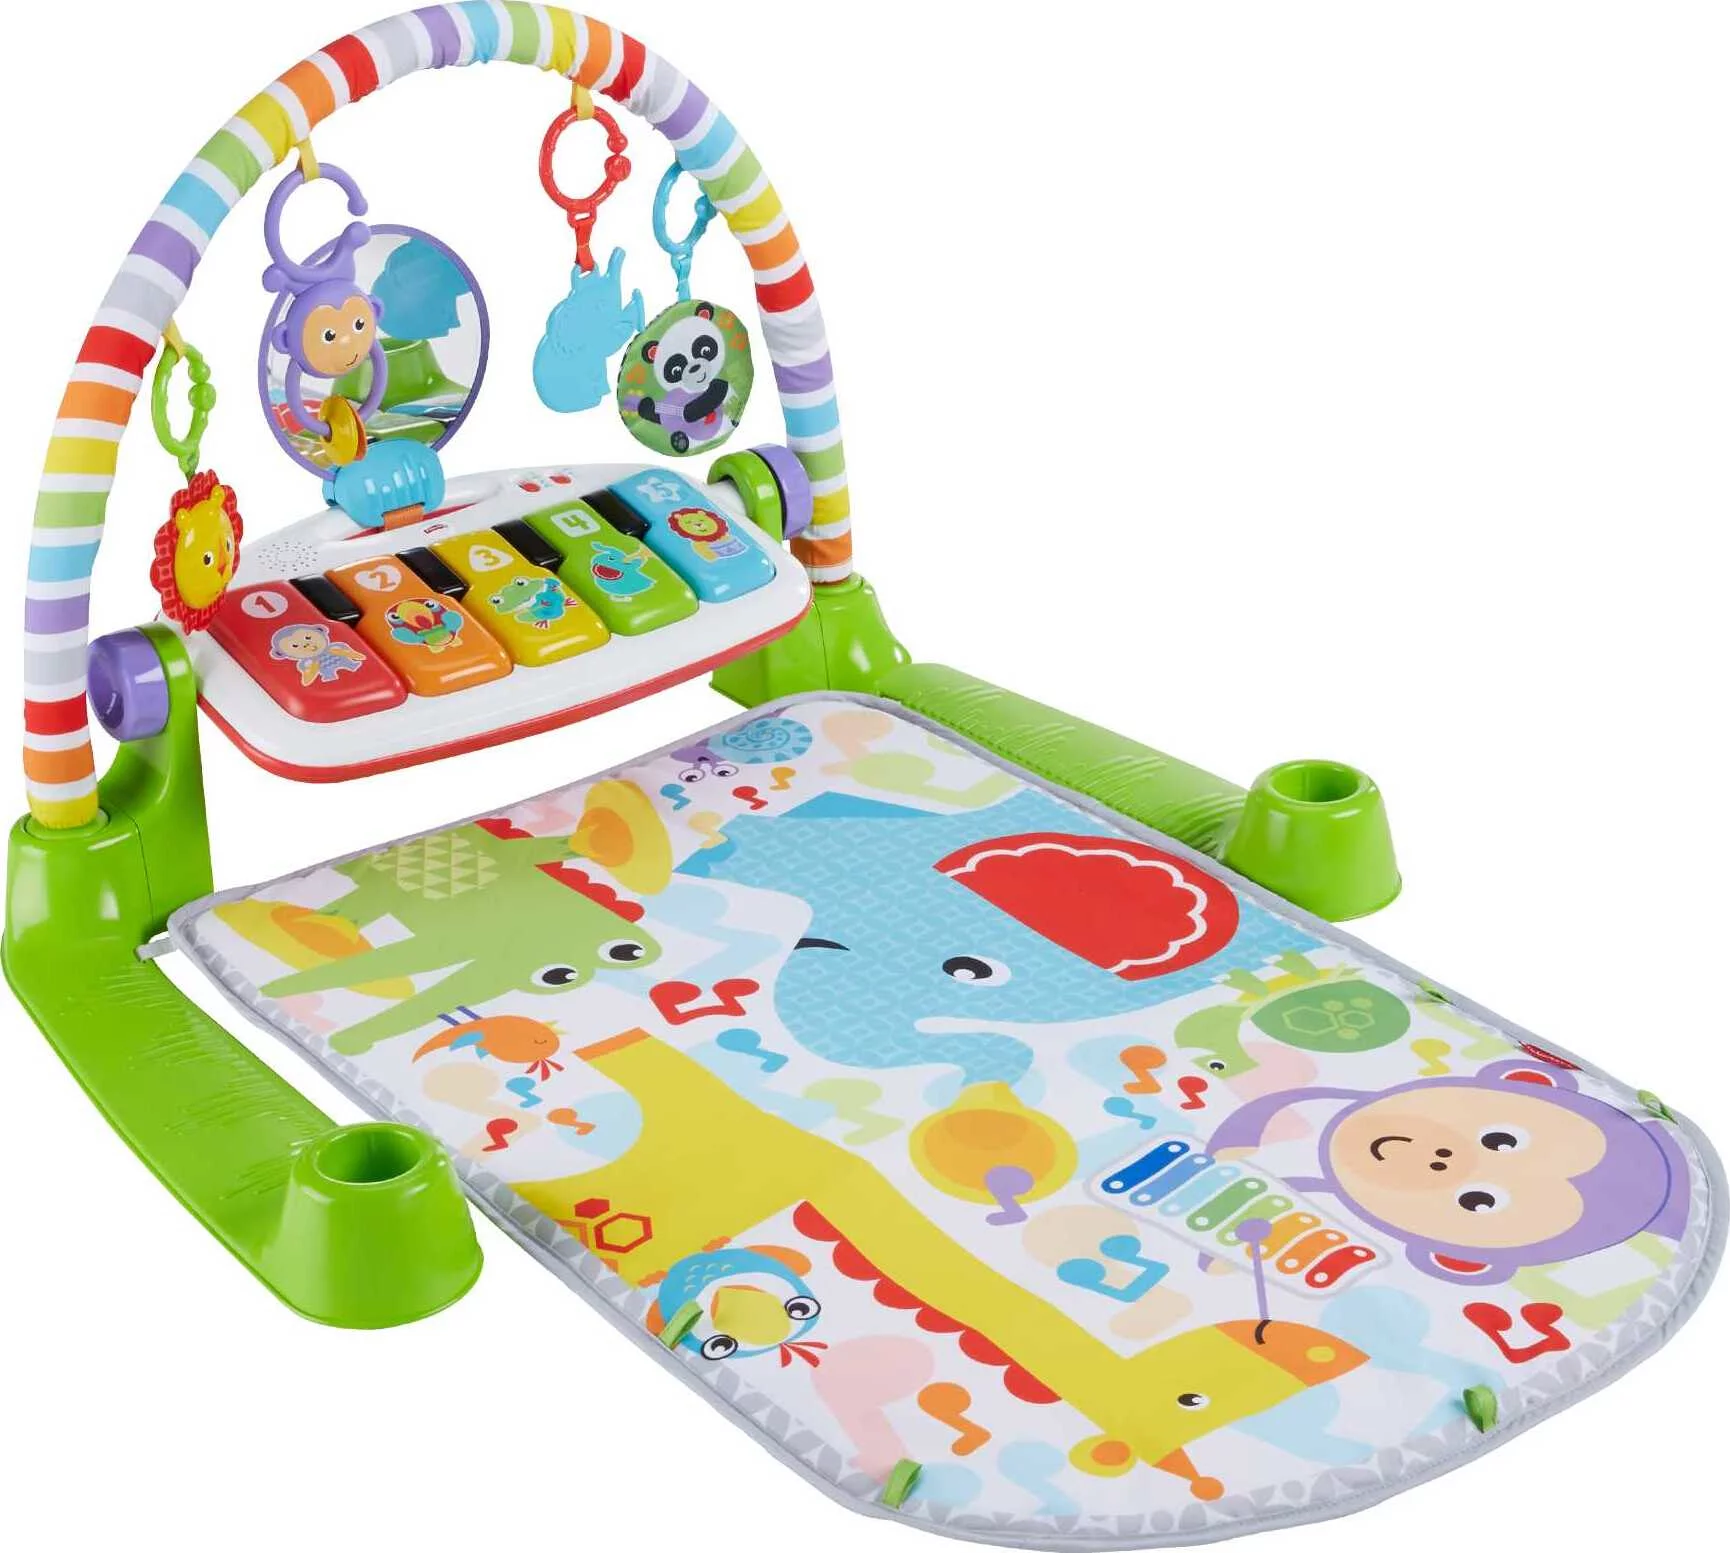 Fisher-Price Deluxe Kick & Play Piano Gym Infant Playmat with Electronic Learning Toy, Green